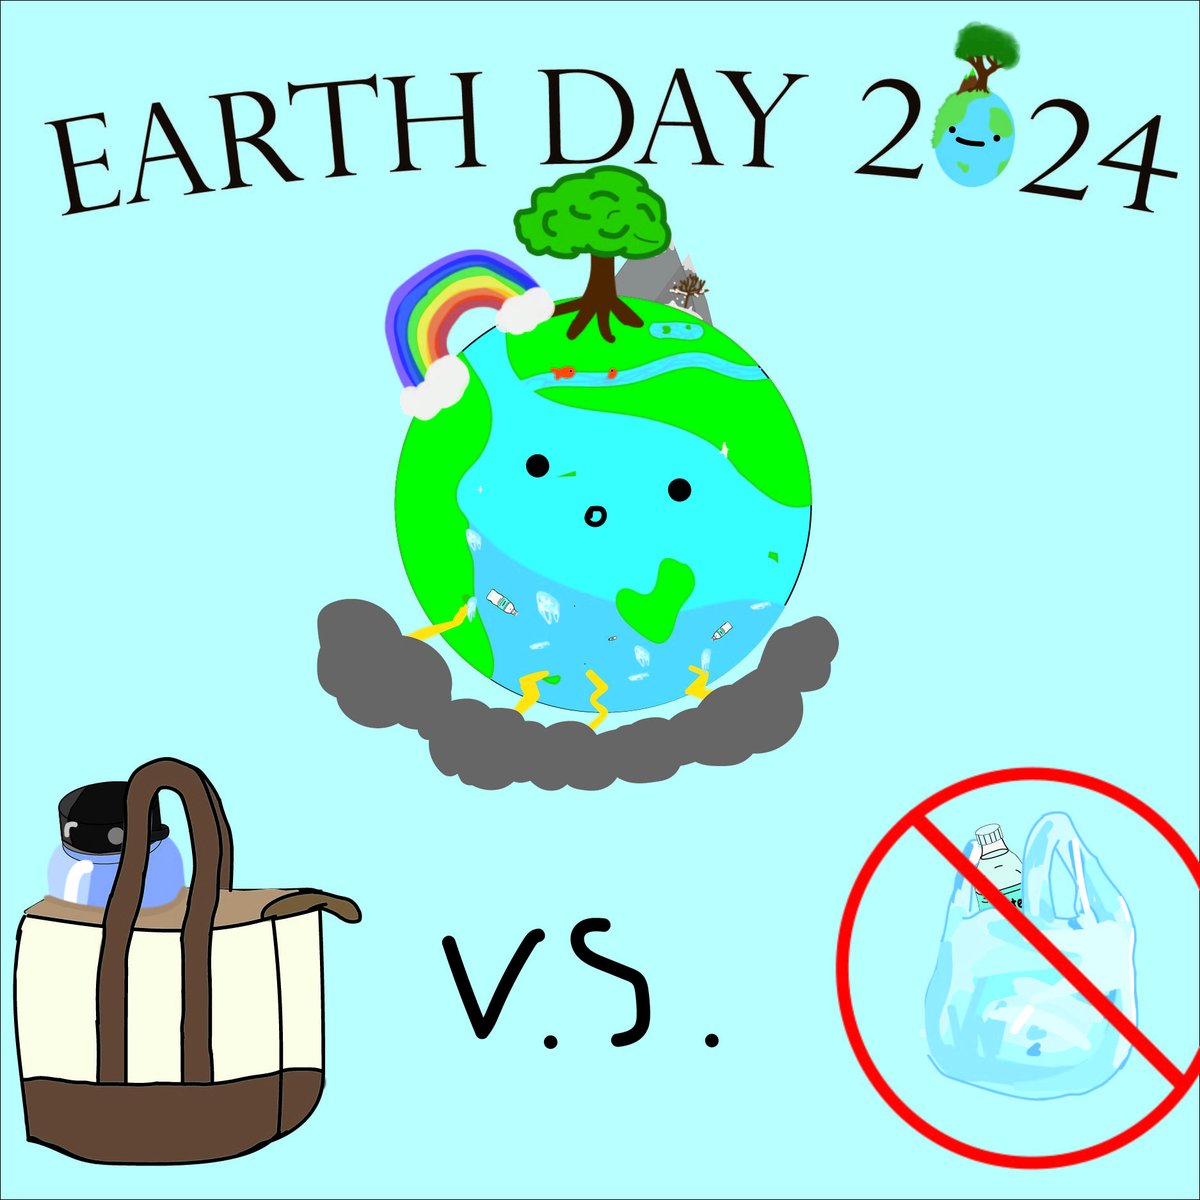 In Honor of #EarthDay2024 we bring you the amazing work of just a few of our Graphic Design Students! @CCSDMagnetSchools #ArtsEducation #KOGraphicDesign #KOPride